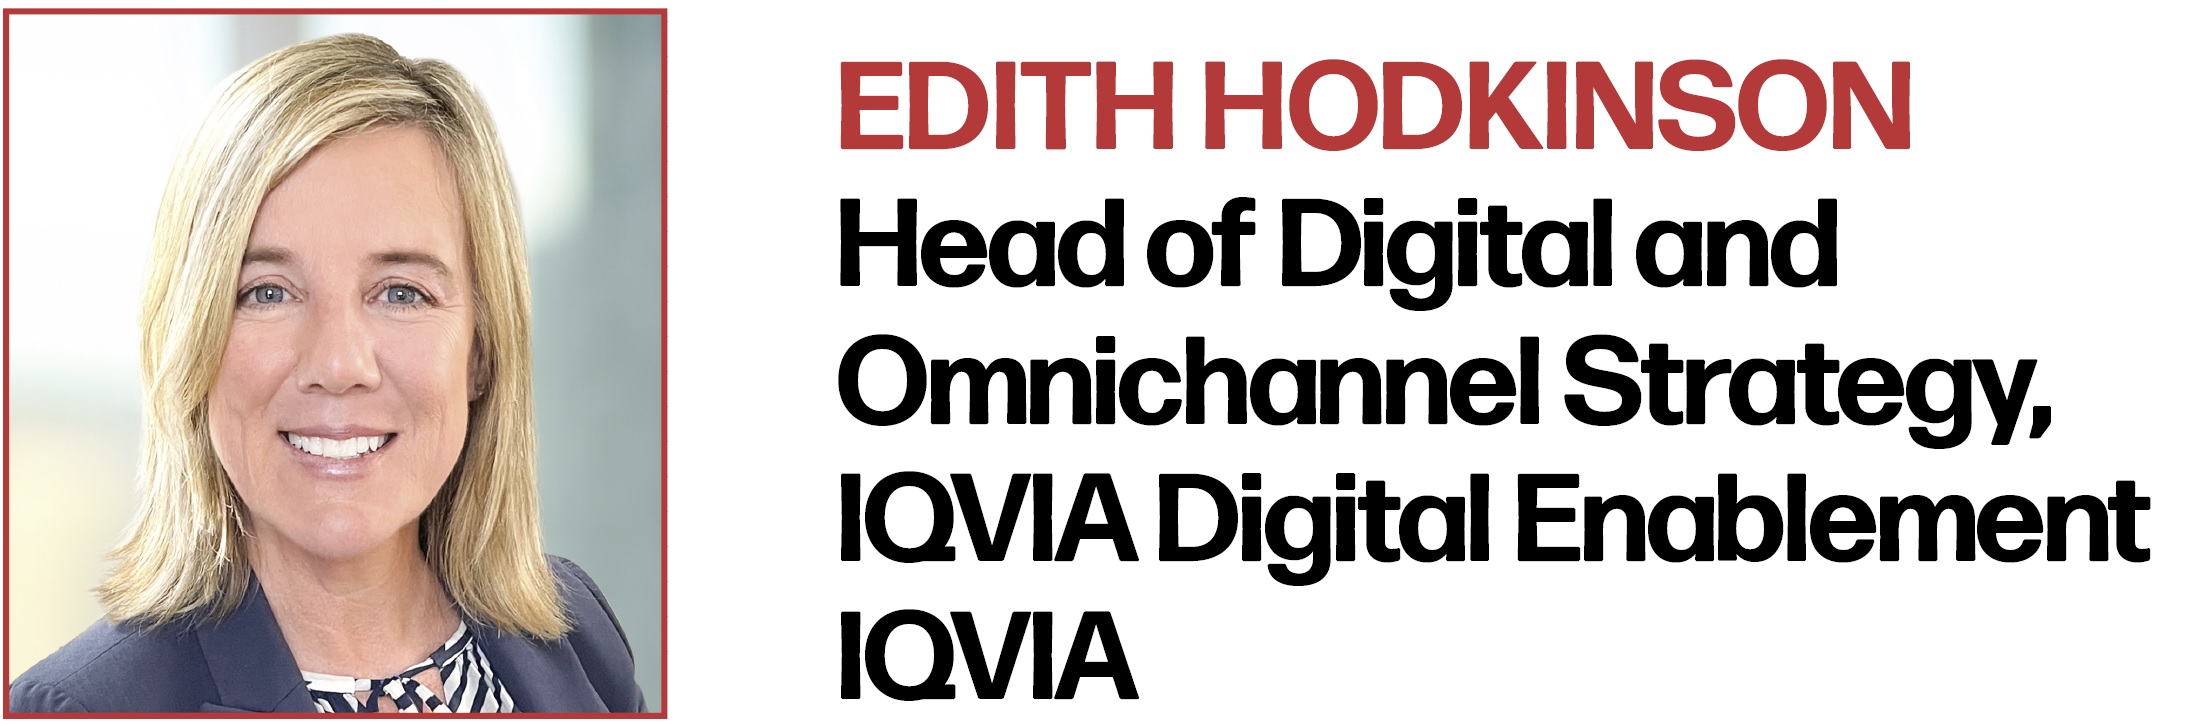 Edith Hodkinson Head of Digital and Omnichannel Strategy, IQVIA Digital Enablement IQVIA